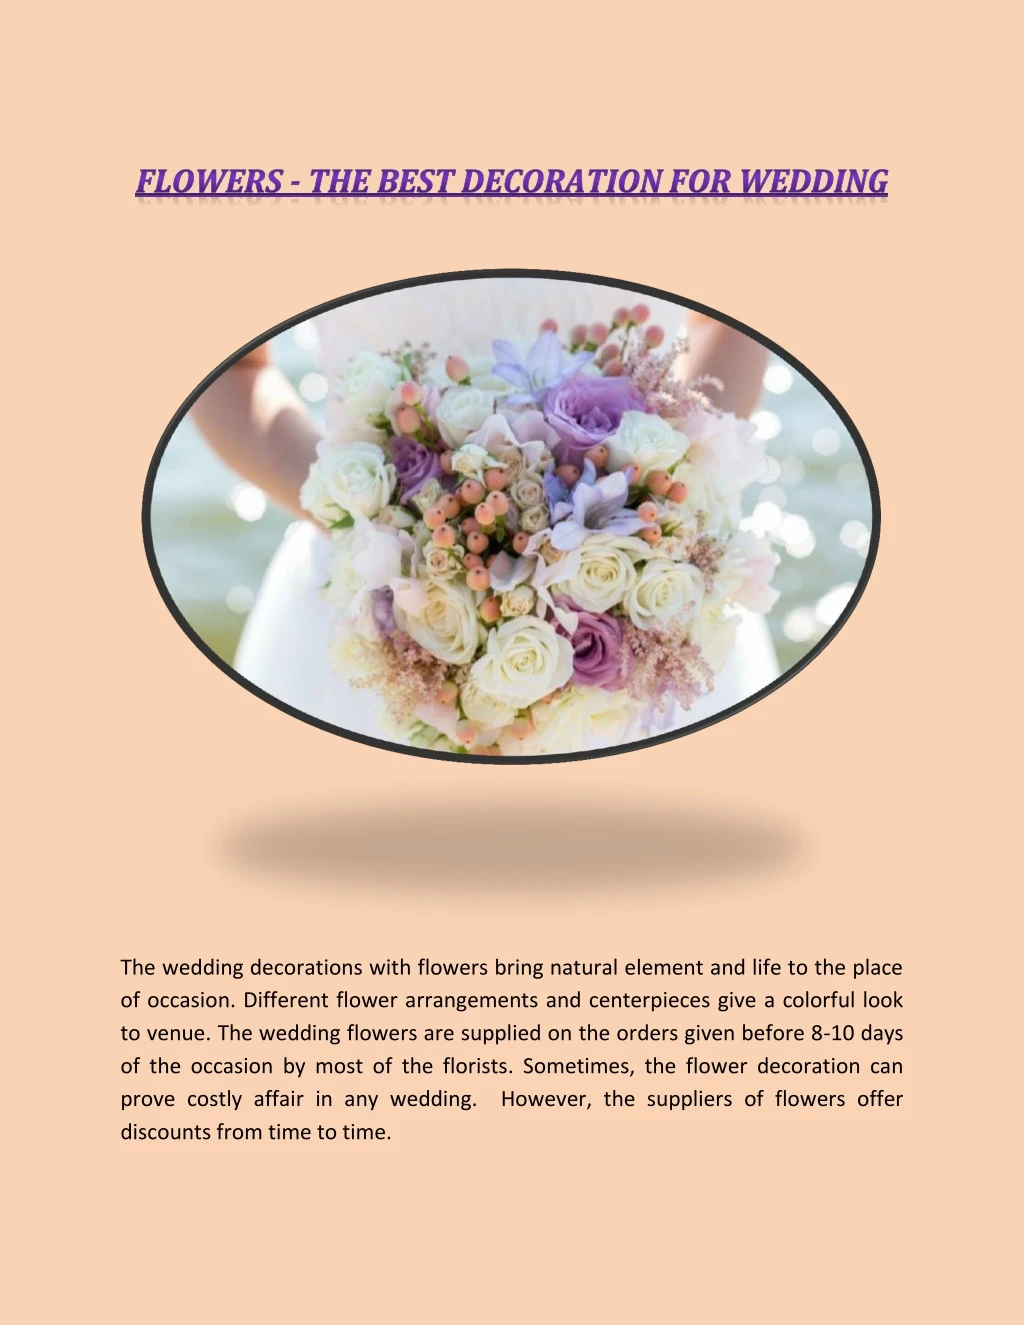 the wedding decorations with flowers bring